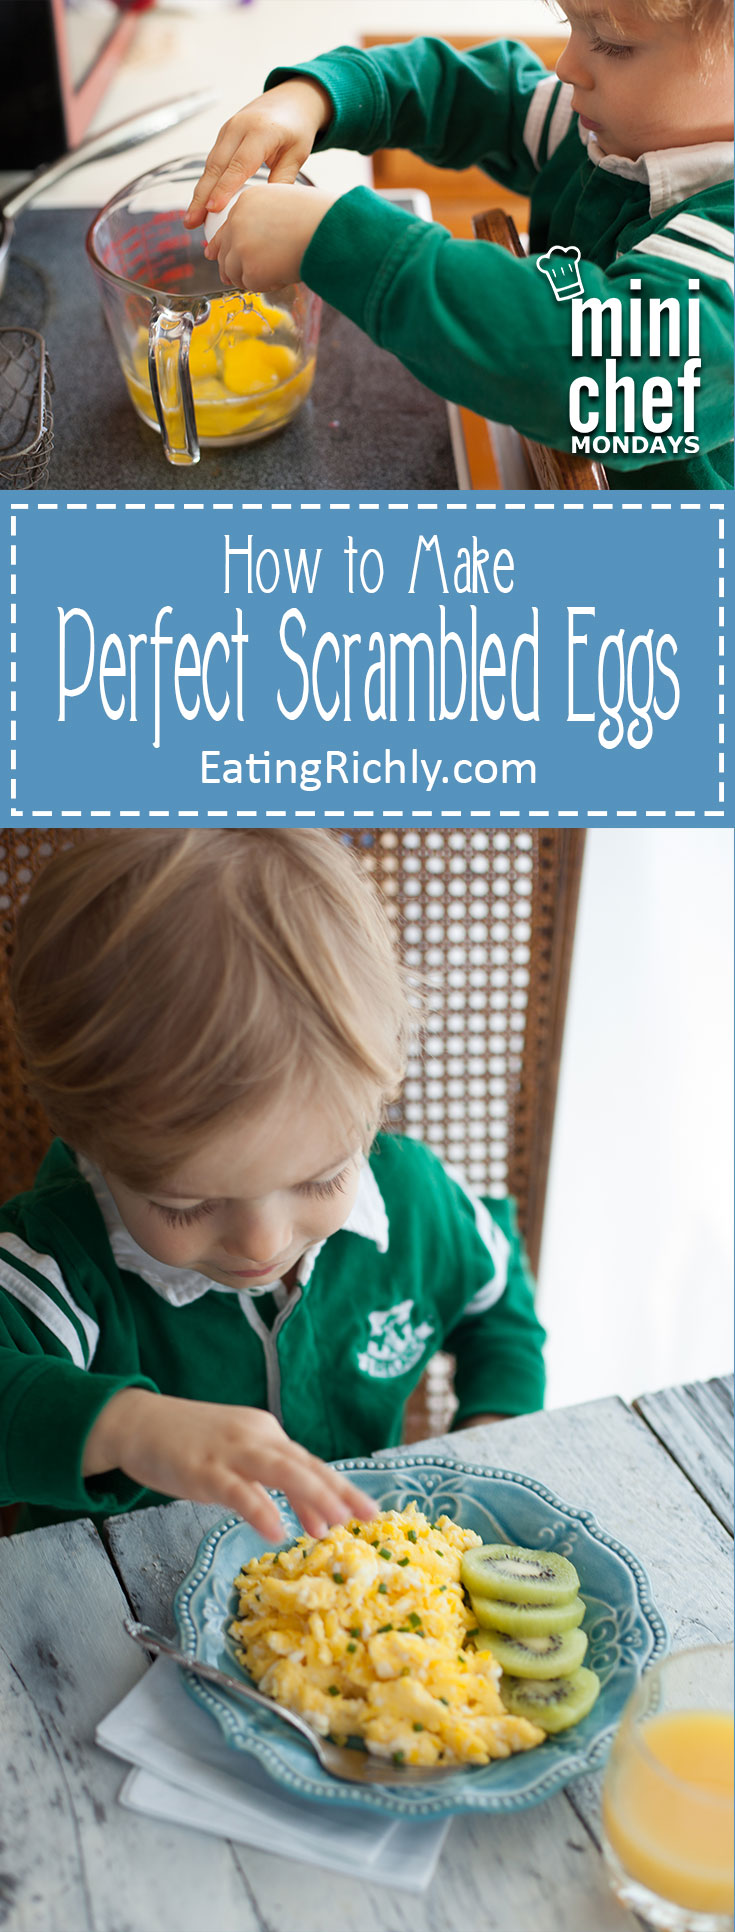 Watch a two year old teach you how to scramble eggs perfectly, with step by step photos and video. You'll learn how to scramble eggs like a pro! Part of #MiniChefMondays on EatingRichly.com 